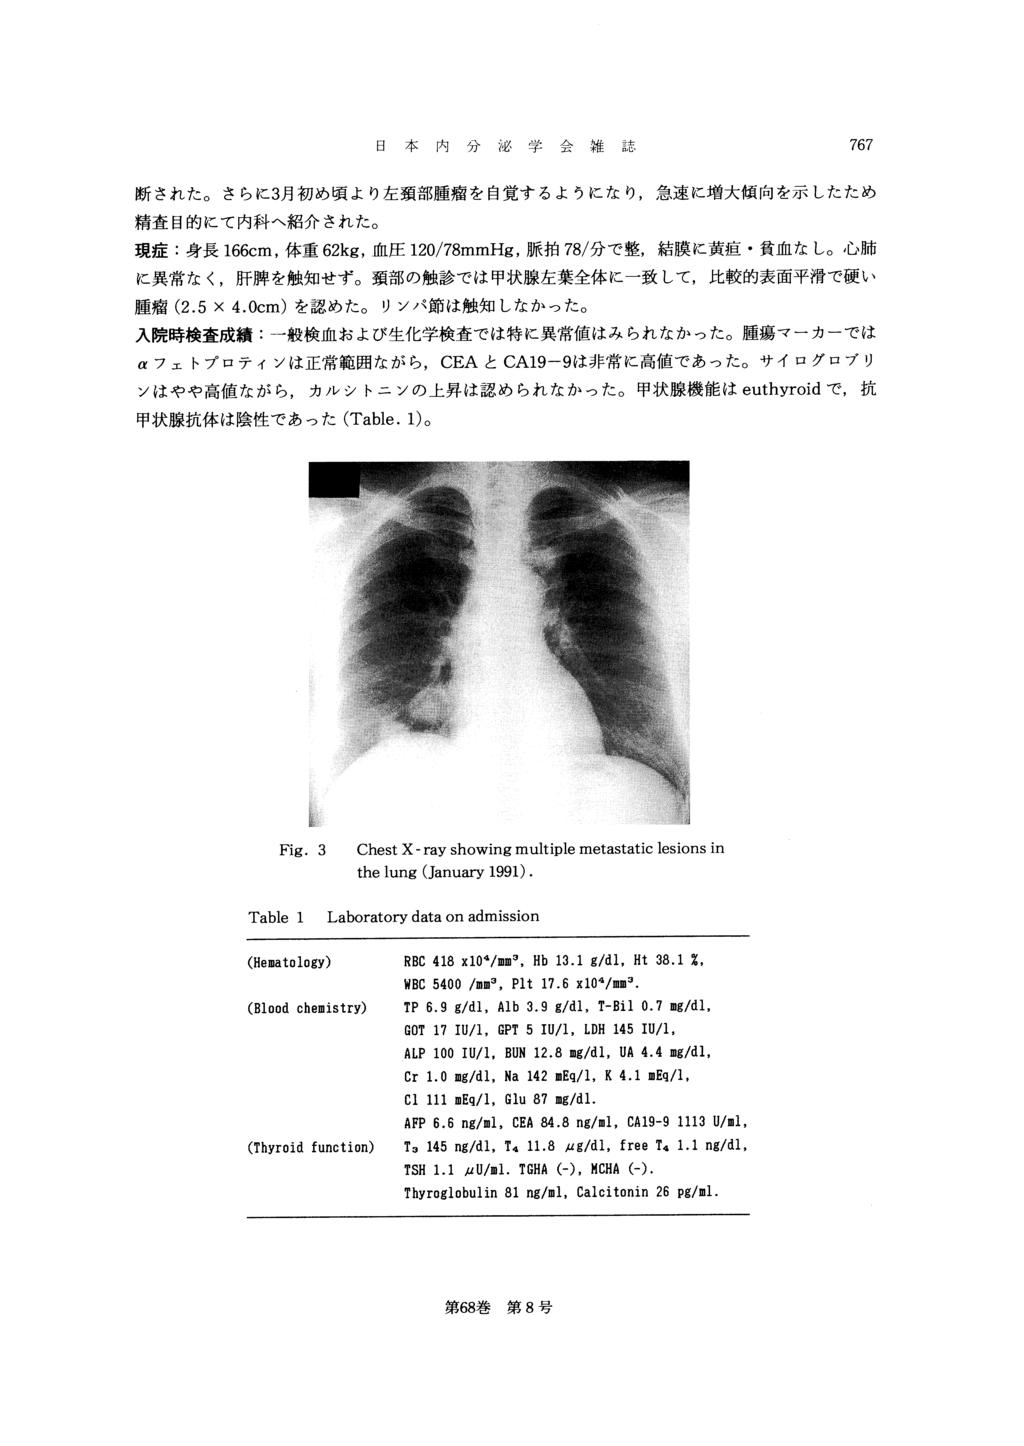 Fig. 3 Chest X-ray showing multiple metastatic lesions in